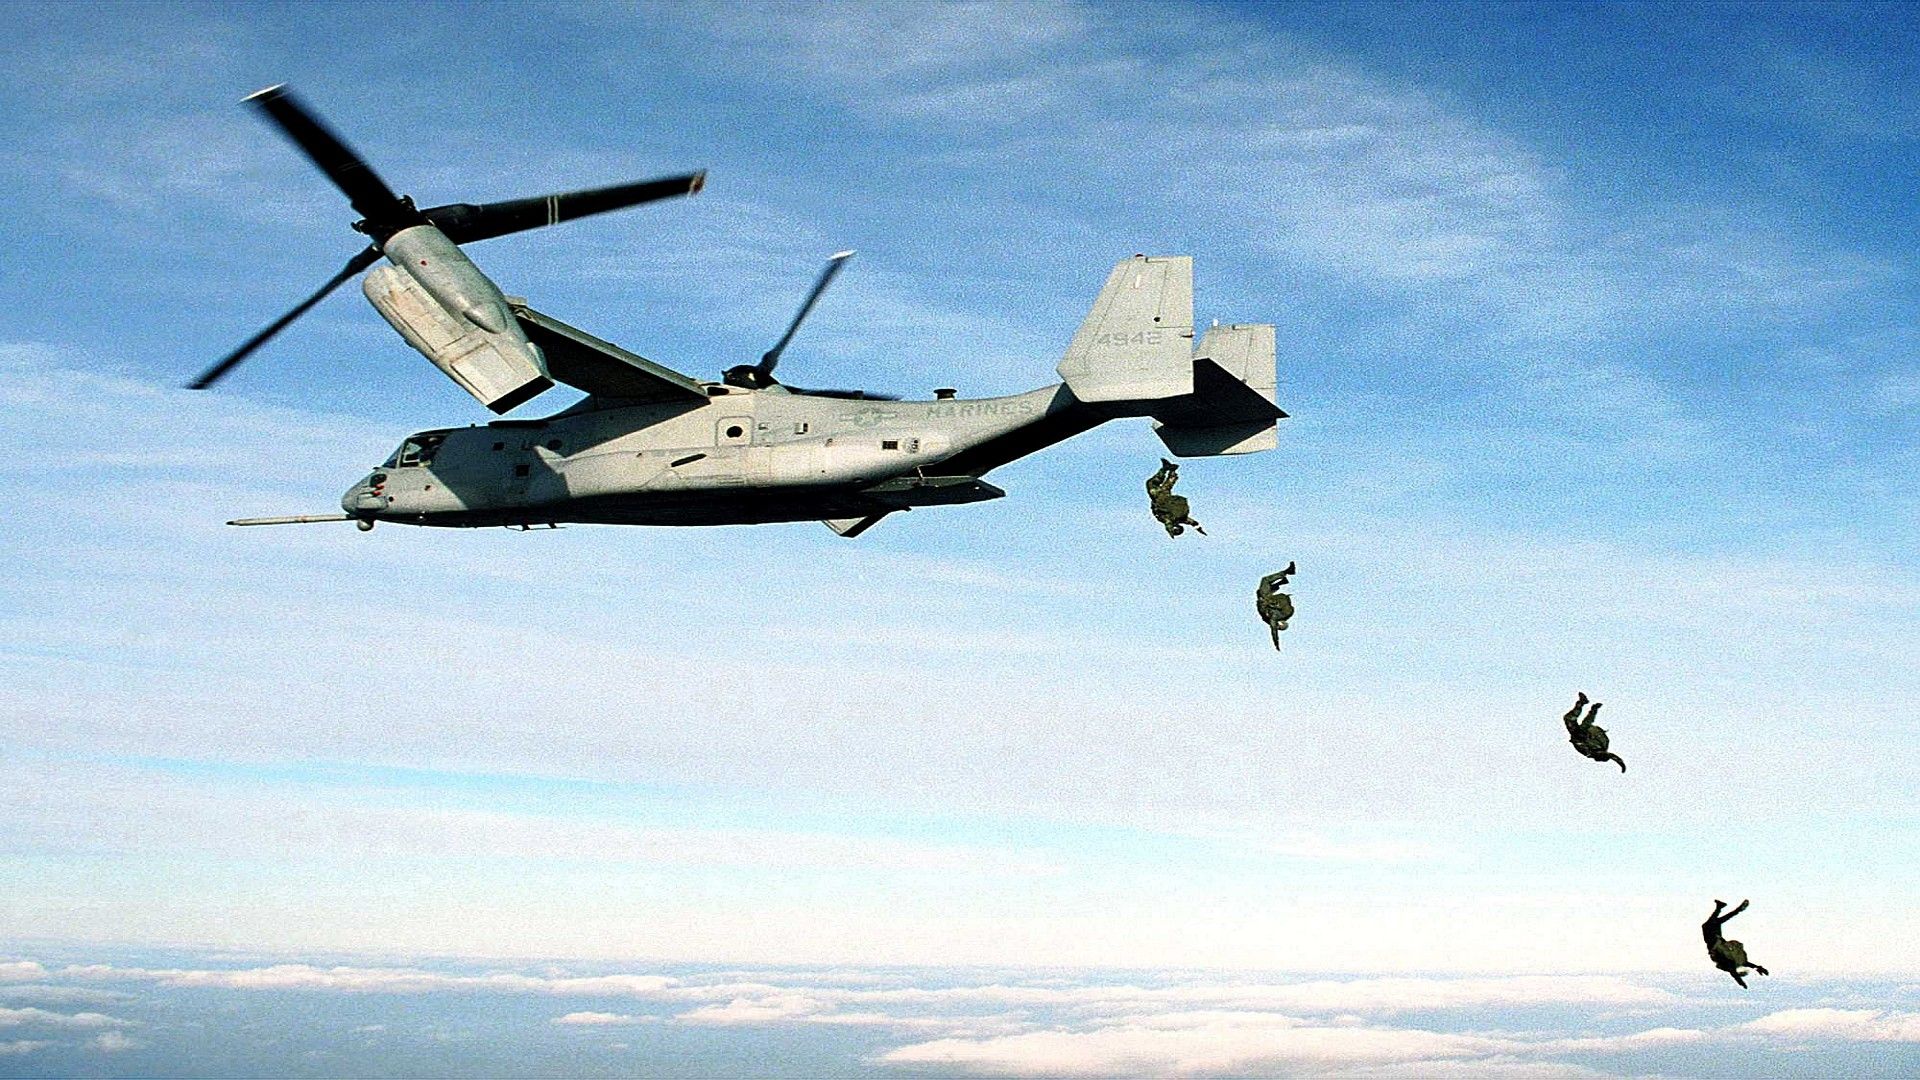 Military, savers, helicopter, wallpaper, screensavers, paratroopers, windows, osprey